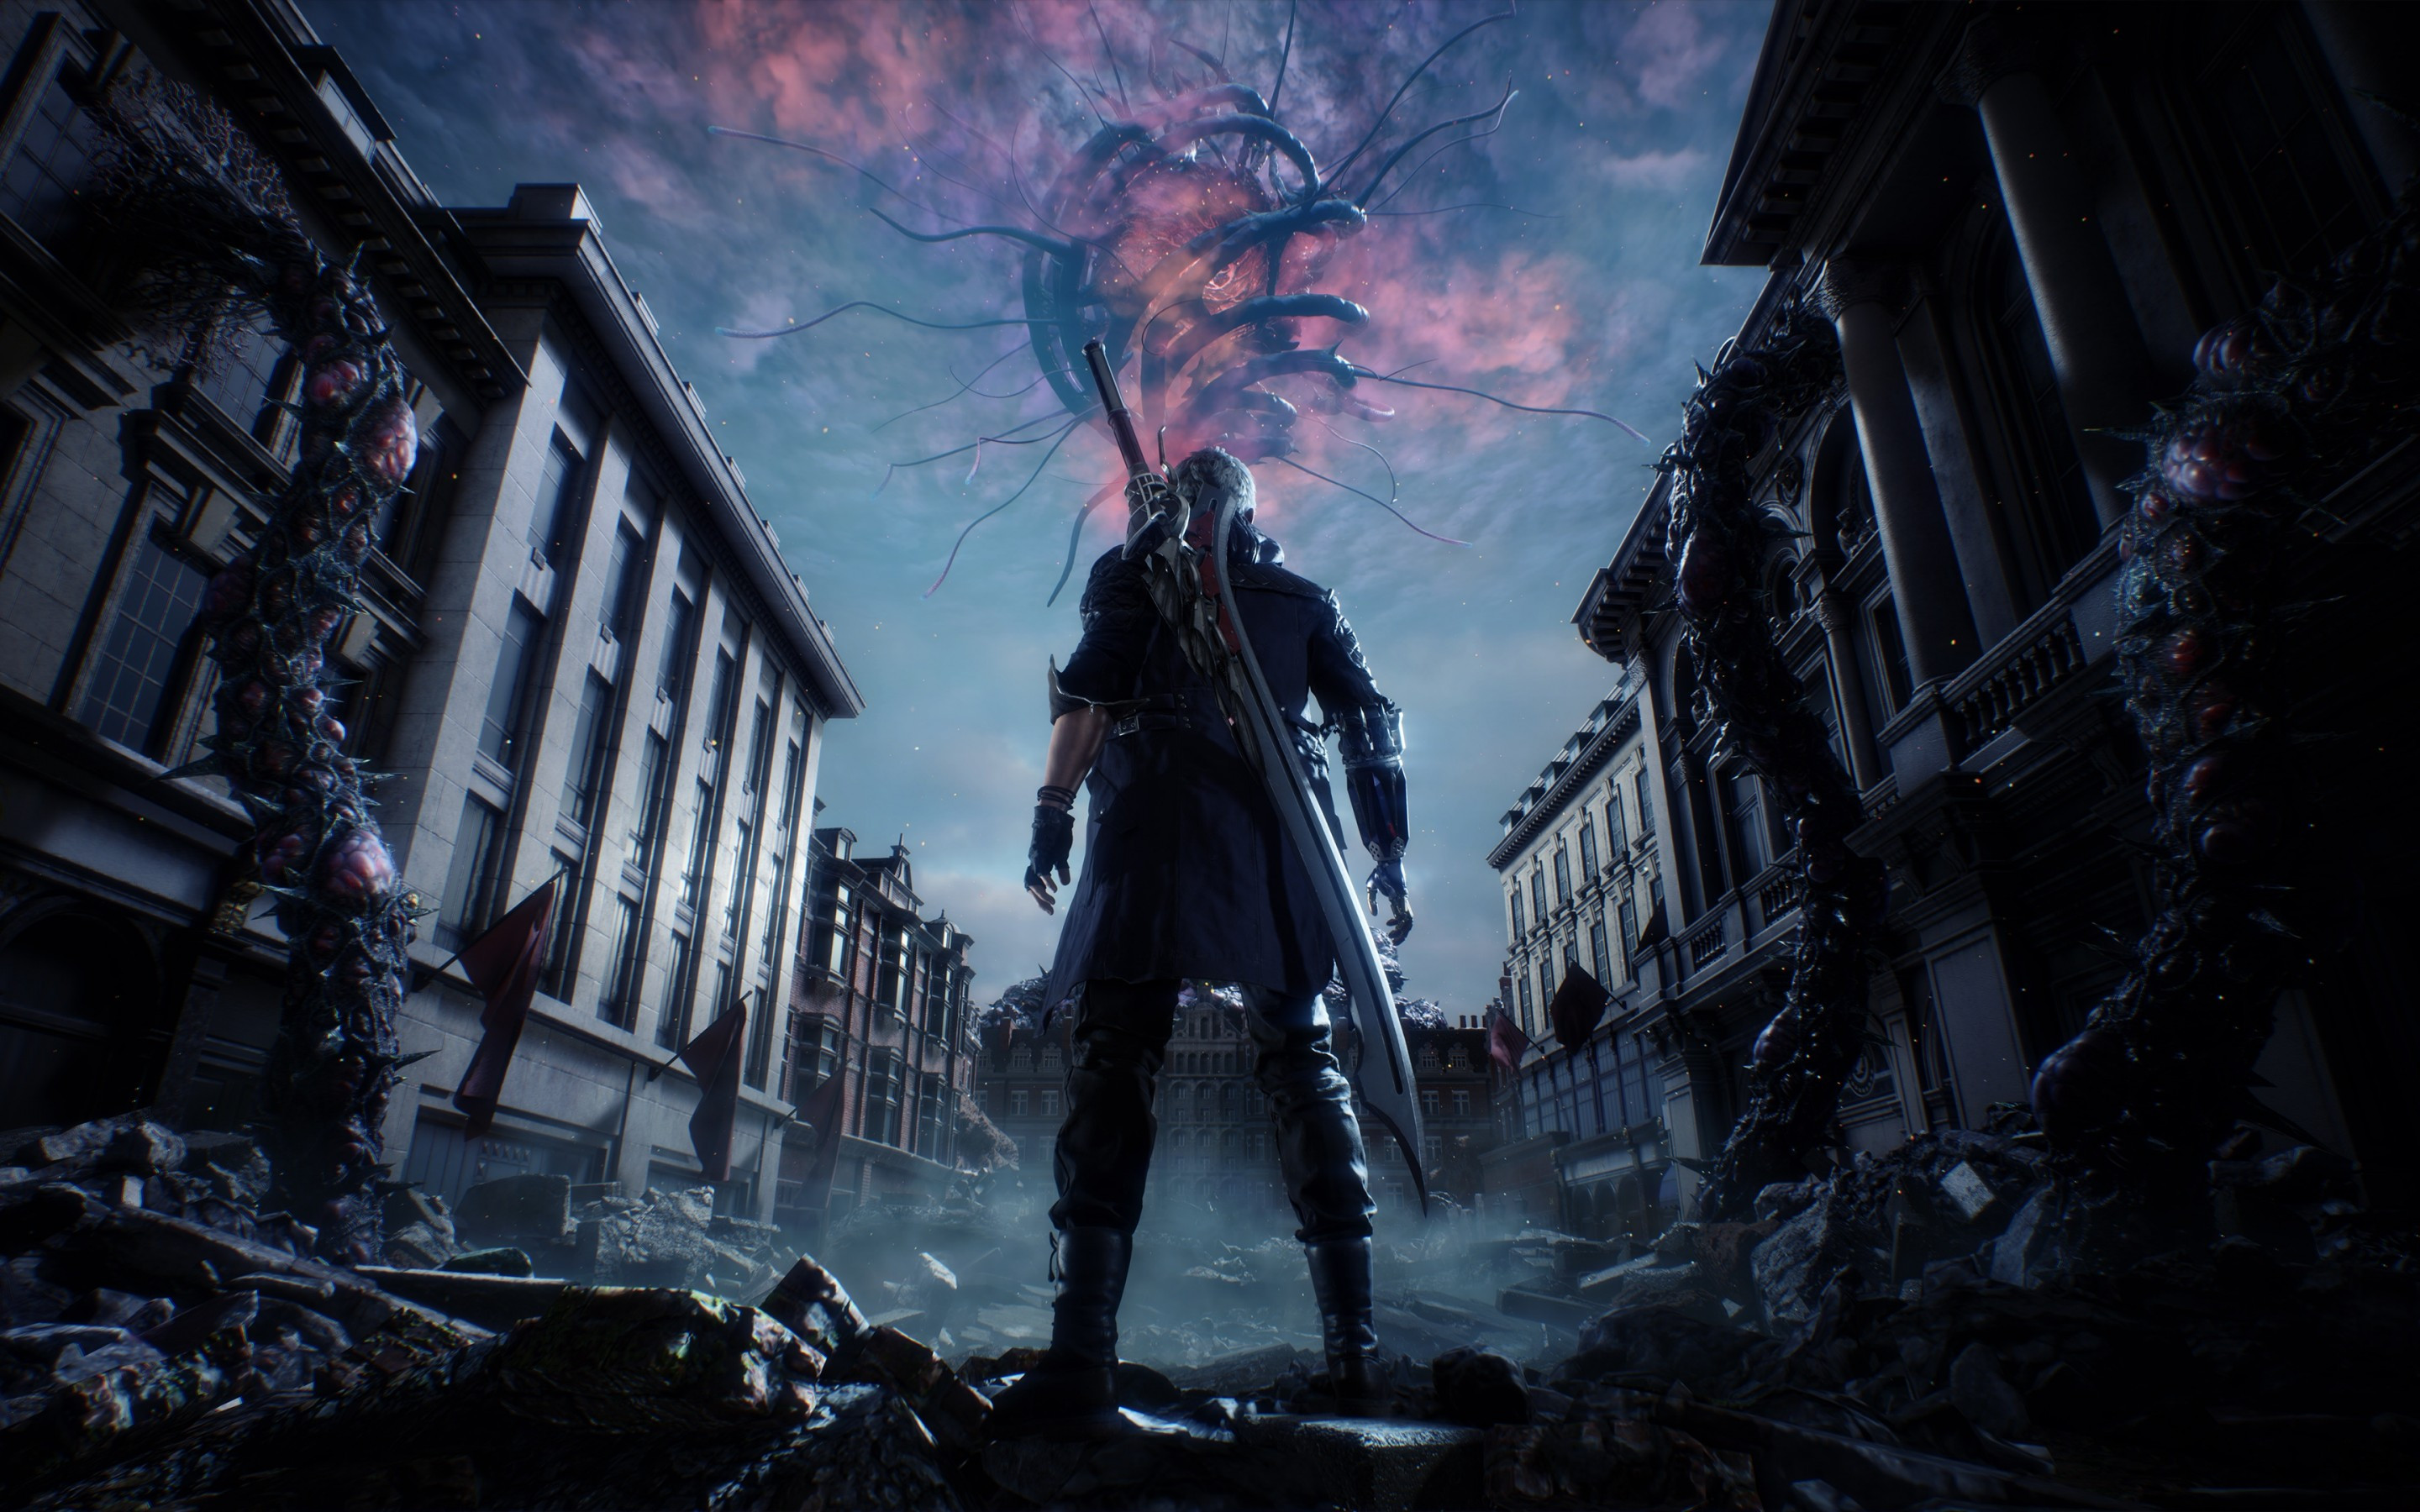 Download 2880x1800 Devil May Cry Creatures, Jrpg Games Wallpaper for MacBook Pro 15 inch